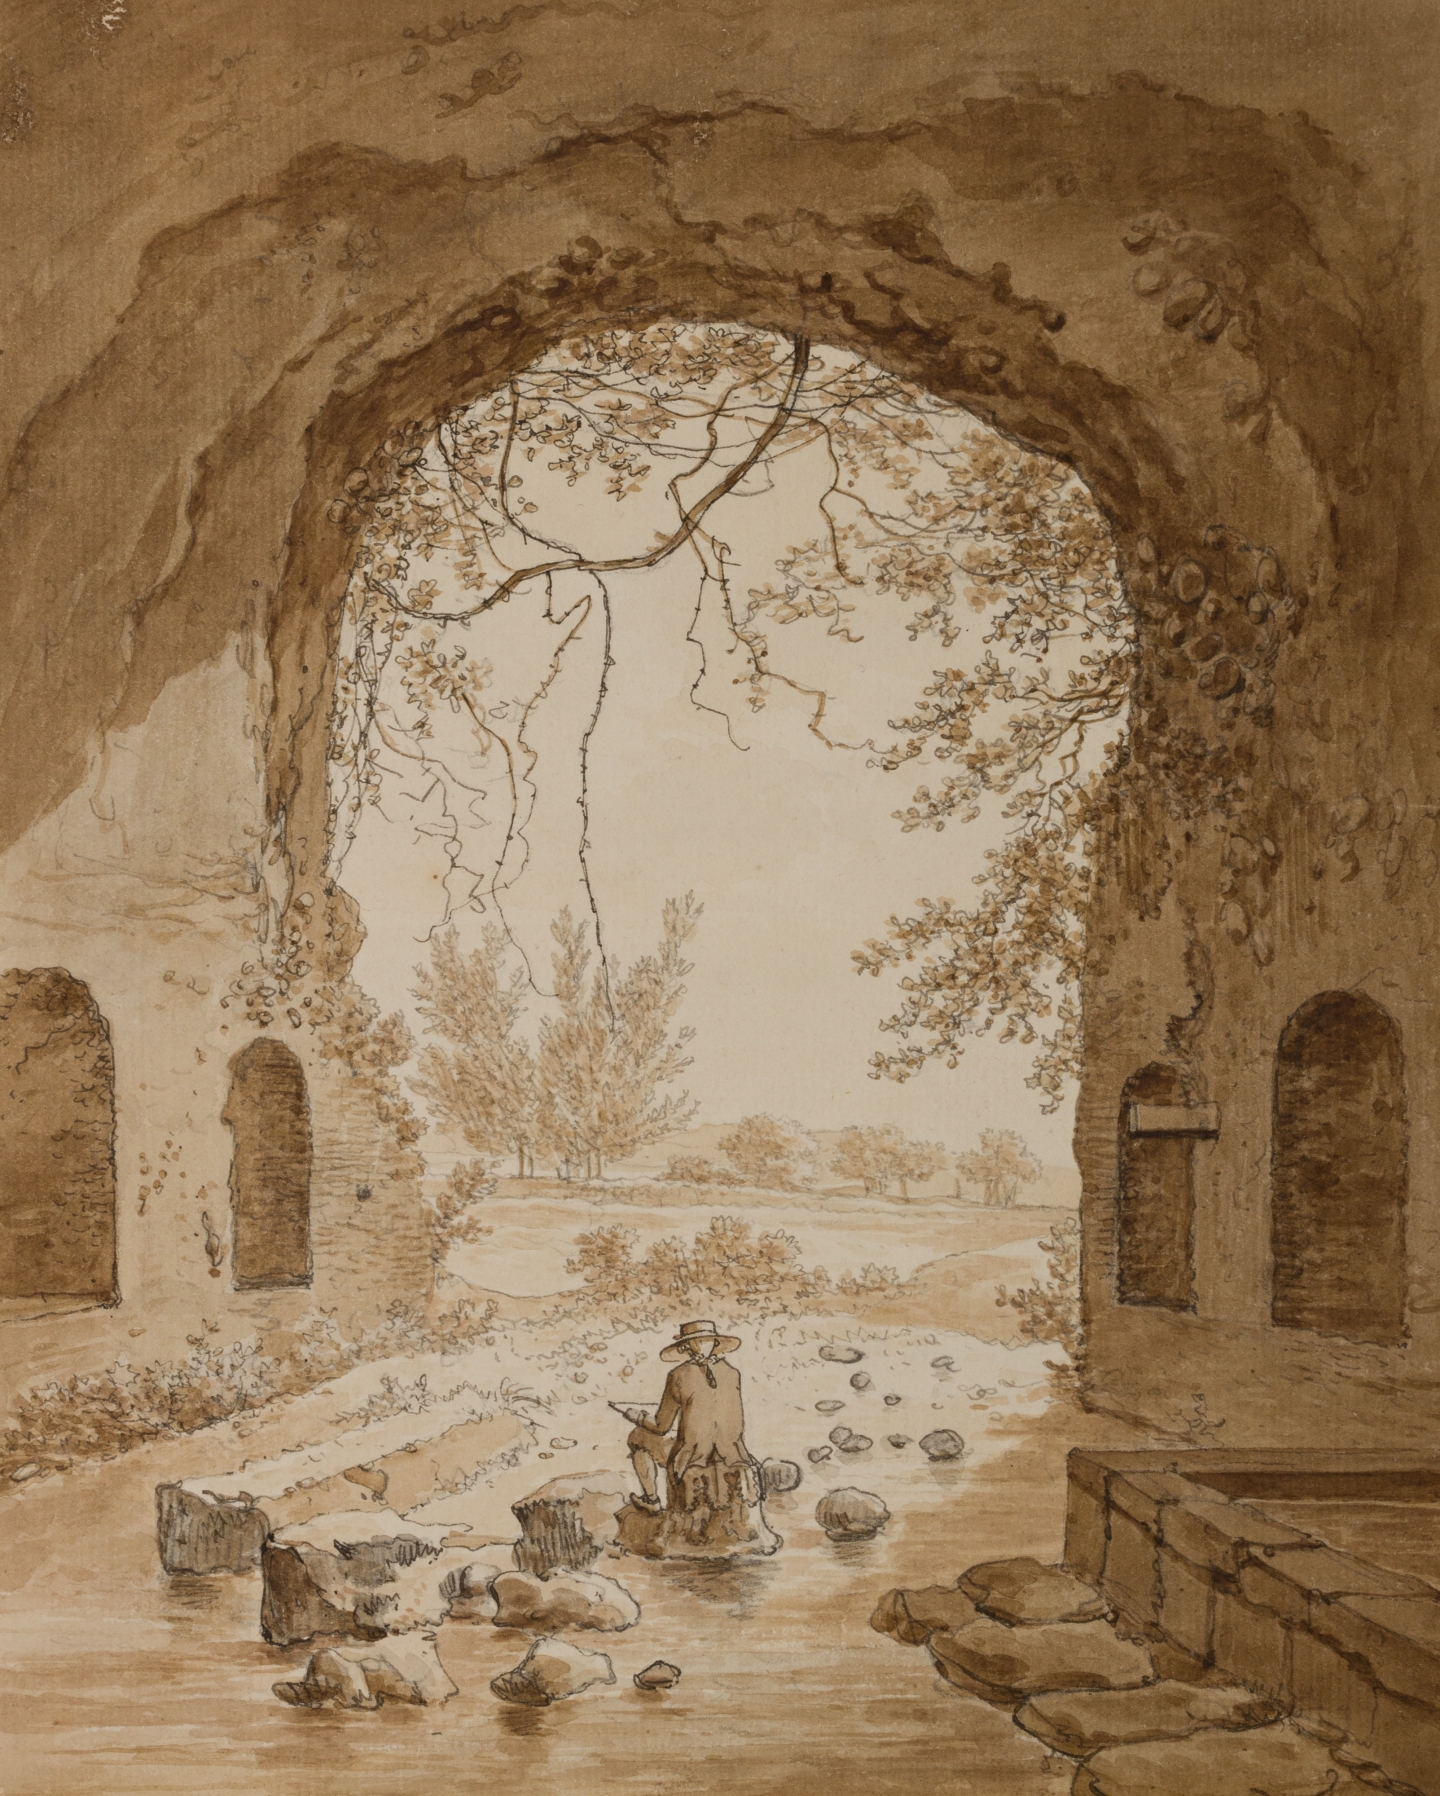 Daniël Dupré (Amsterdam, 1751-1817) Grotto of Nymph Egeria, Rome (in the centre the artist has depicted himself while sketching)